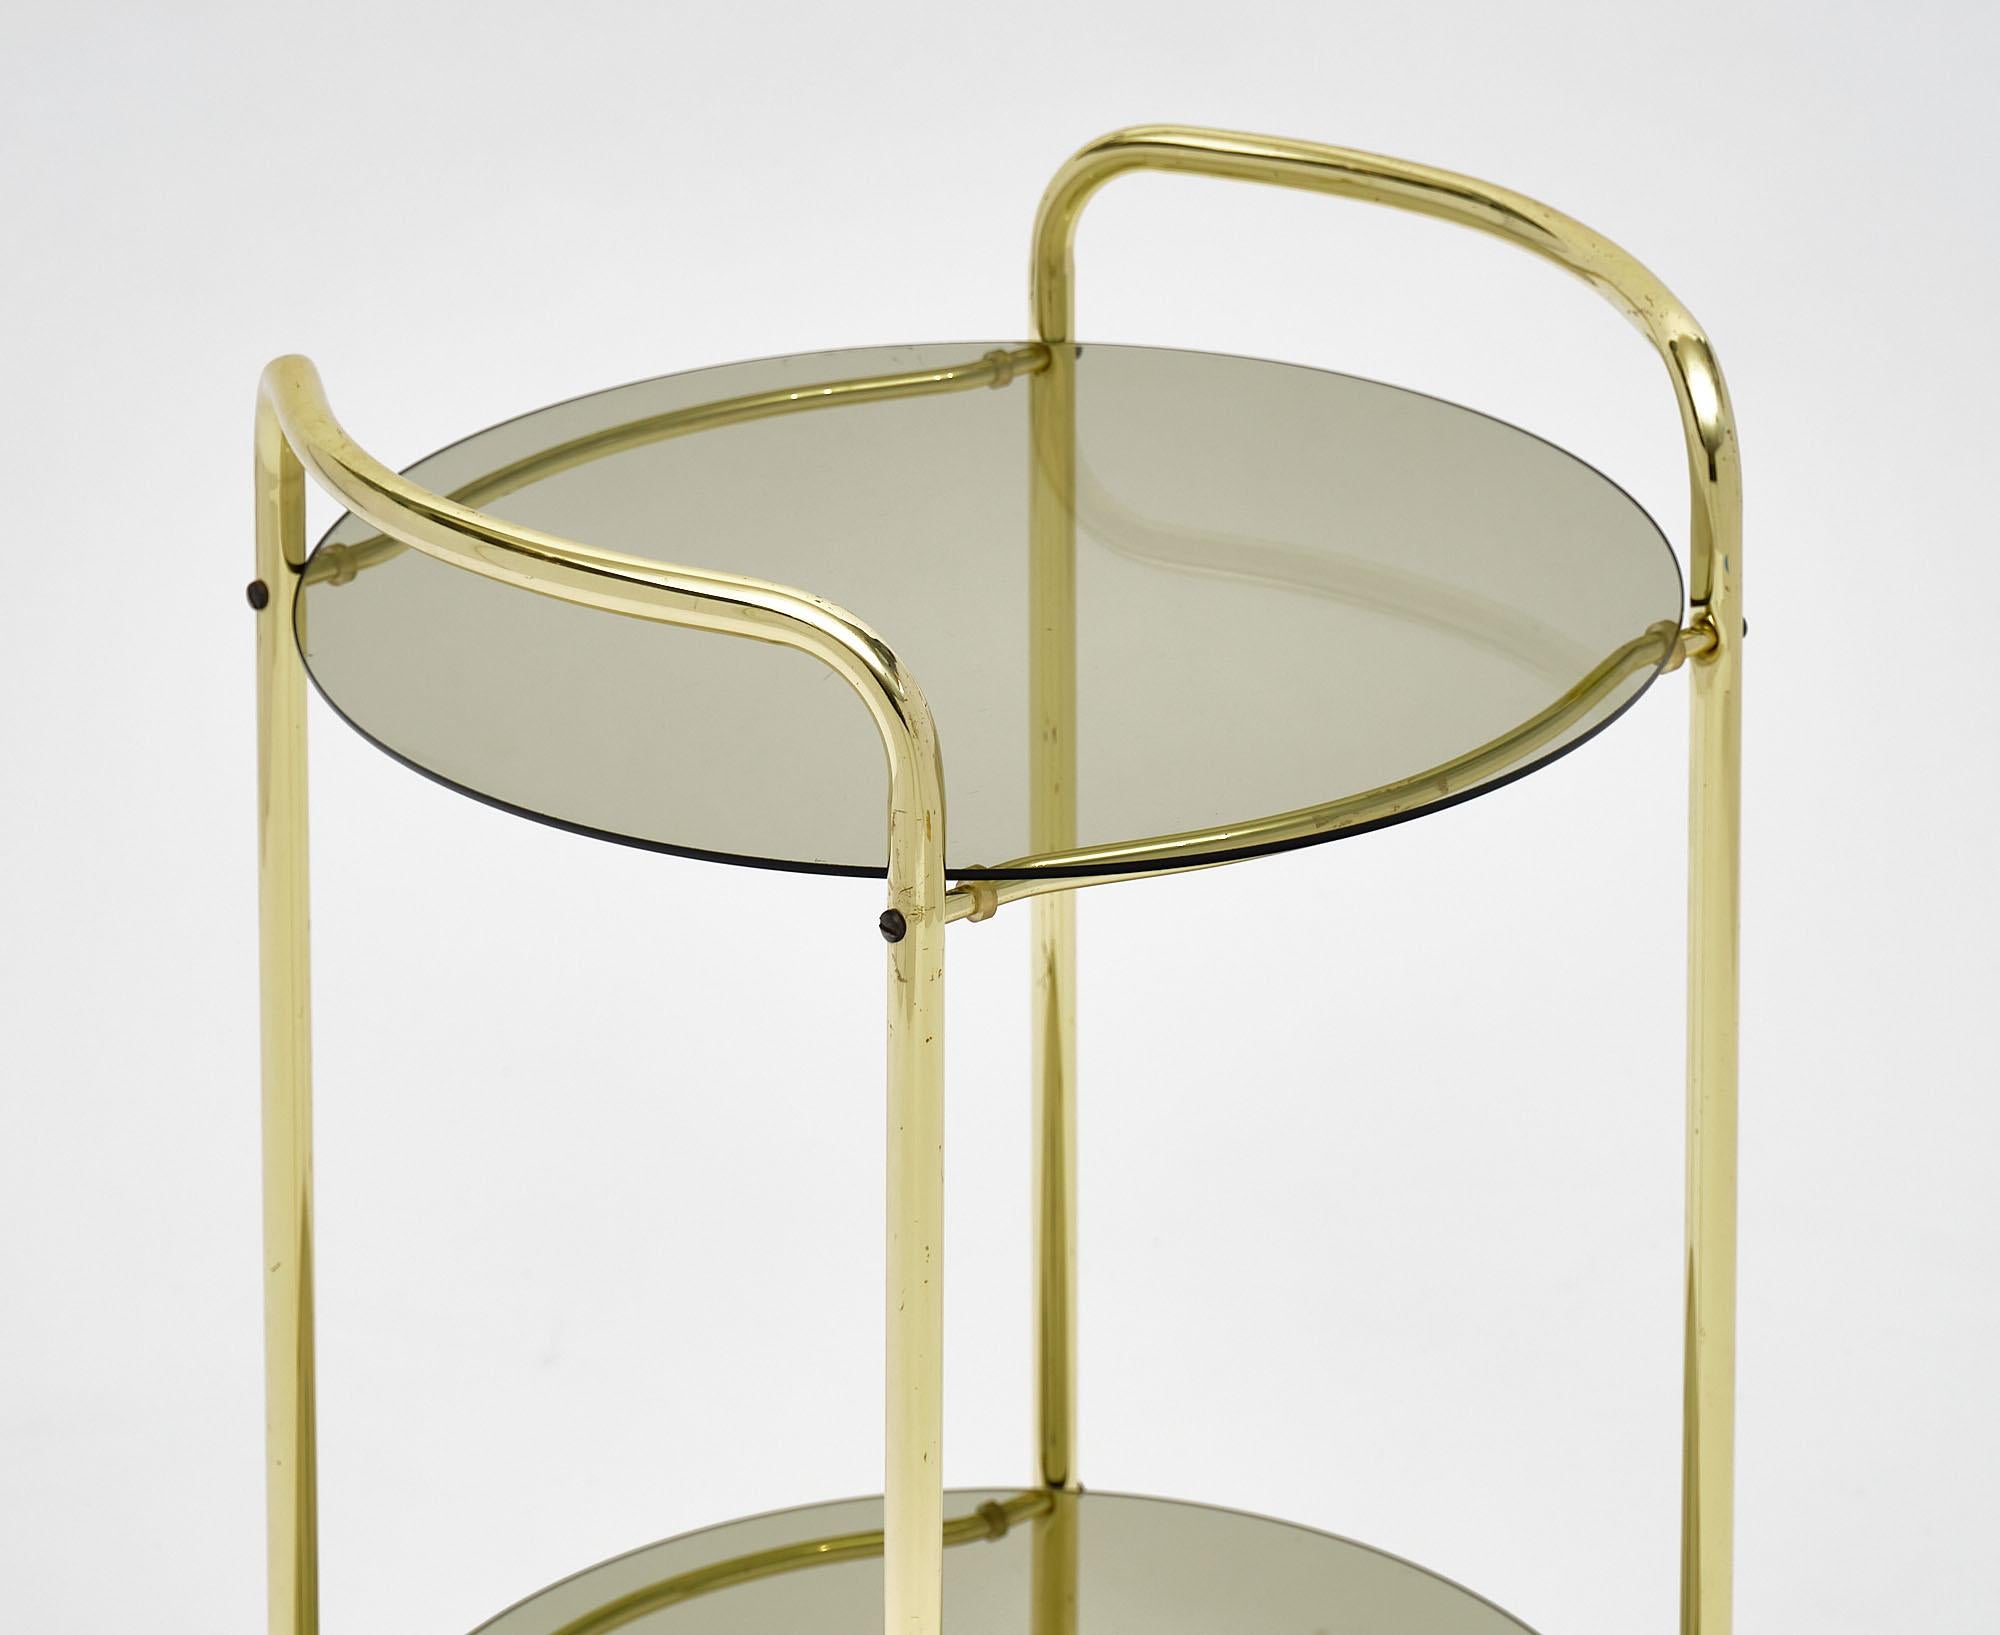 Bar cart from France with original casters. This brass structure features two smoked glass shelves.